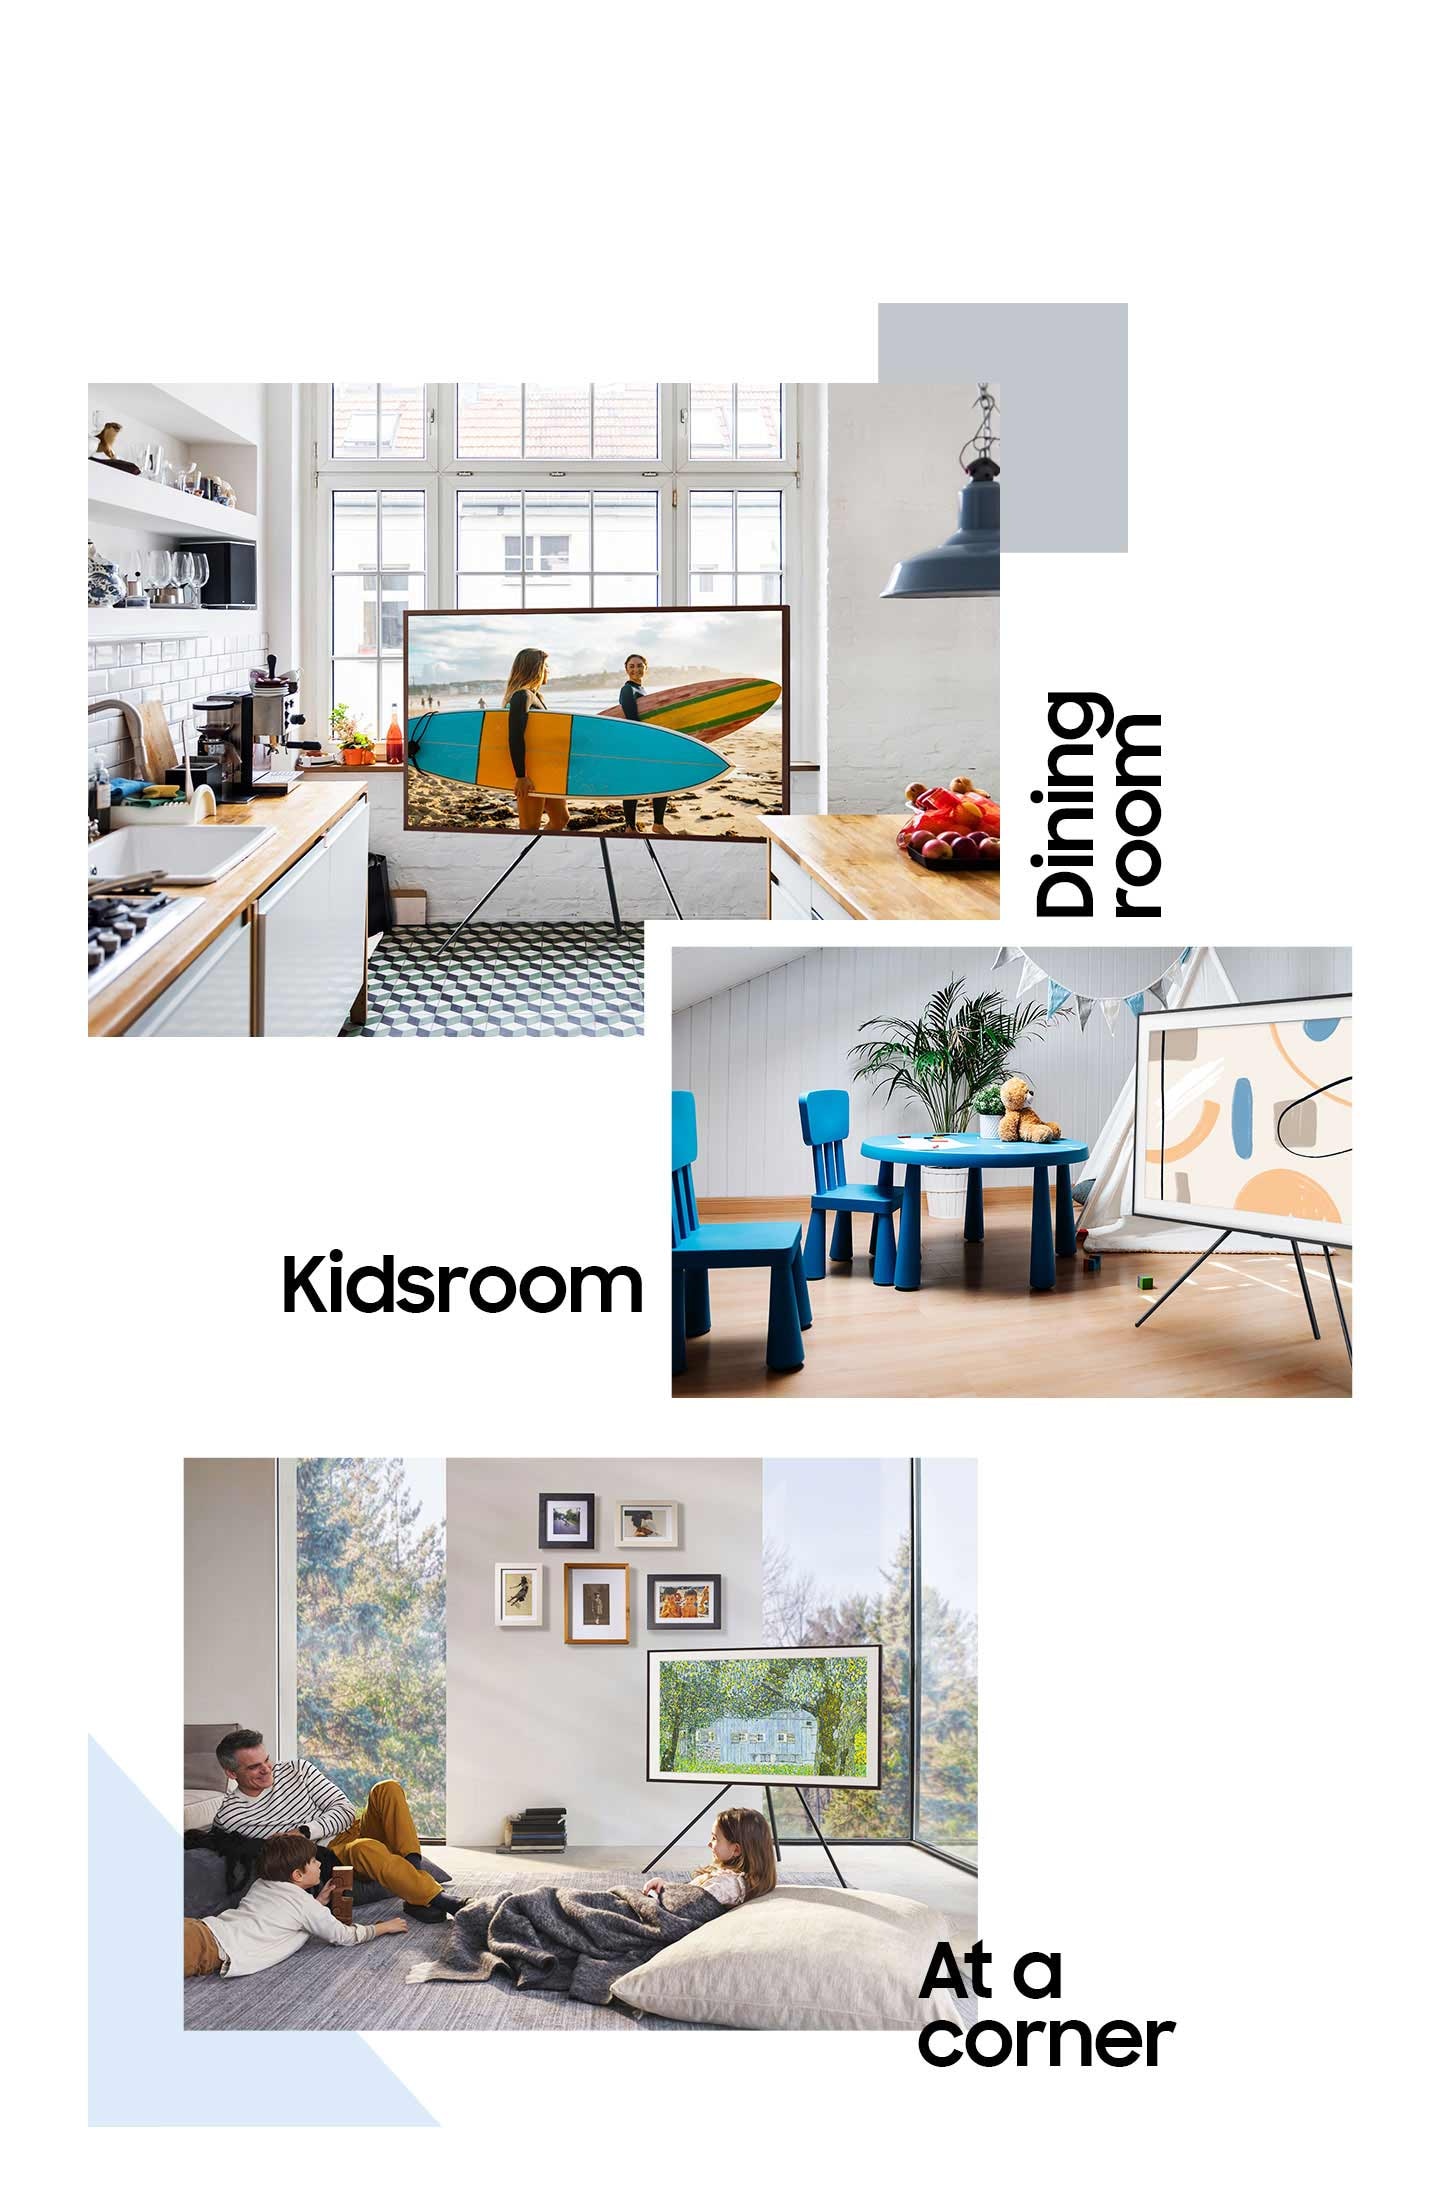 Three different scenarios of the Frame TV on a Studio Stand are layered on top of each other. The top is labeled Dining room, where the TV has its back to a window, with two girls holding surfboards at a beach onscreen. The middle is labeled Kidsroom, with the TV set next to a small blue kids table, two chairs, and a tent. Abstract art is onscreen. The bottom scenario is labeled at a corner. Here the TV is placed in a stylish living room near the windows with its back to the corner next to a large floor-to-ceiling windows. A father leans against a sofa, while the son lies on the carpet. The daughter leans against a big pillow under a blanket. A painting of a lake with trees is onscreen.